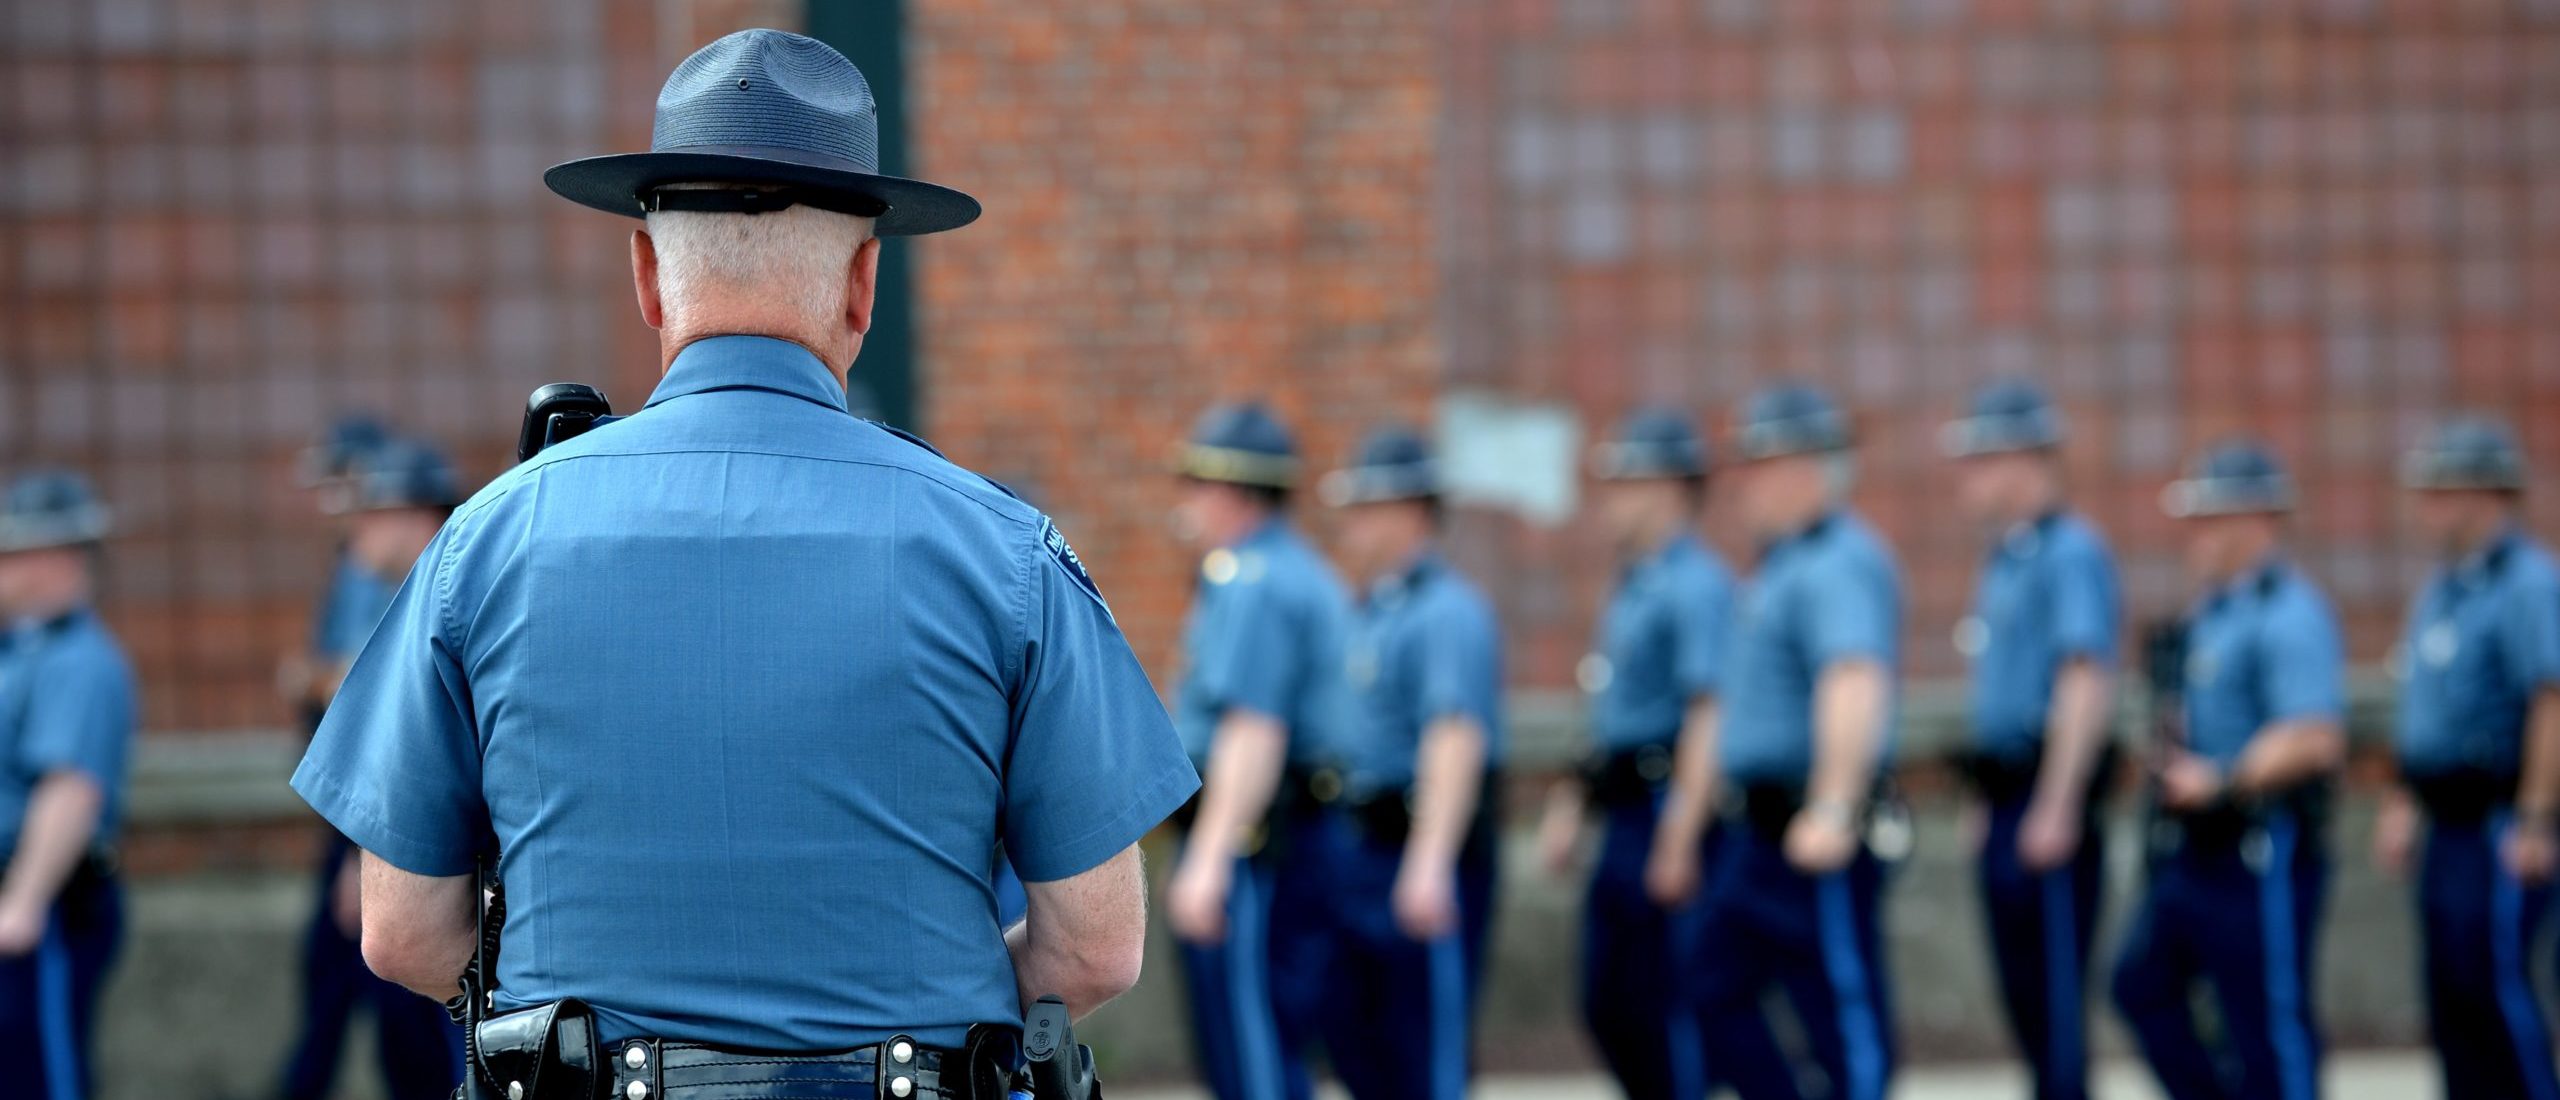 A Massachusetts state trooper watches other troopers line up at the Watertown Mall as a search for the second of two suspects wanted in the Boston Marathon bombings takes place April 19, 2013 in Watertown, Massachusetts. Thousands of heavily armed police staged an intense manhunt Friday for a Chechen teenager suspected in the Boston marathon bombings with his brother, who was killed in a shootout. Dzhokhar Tsarnaev, 19, defied the massive force after his 26-year-old brother Tamerlan was shot and suffered critical injuries from explosives believed to have been strapped to his body. AFP PHOTO/Stan HONDA (Photo credit should read STAN HONDA/AFP via Getty Images)